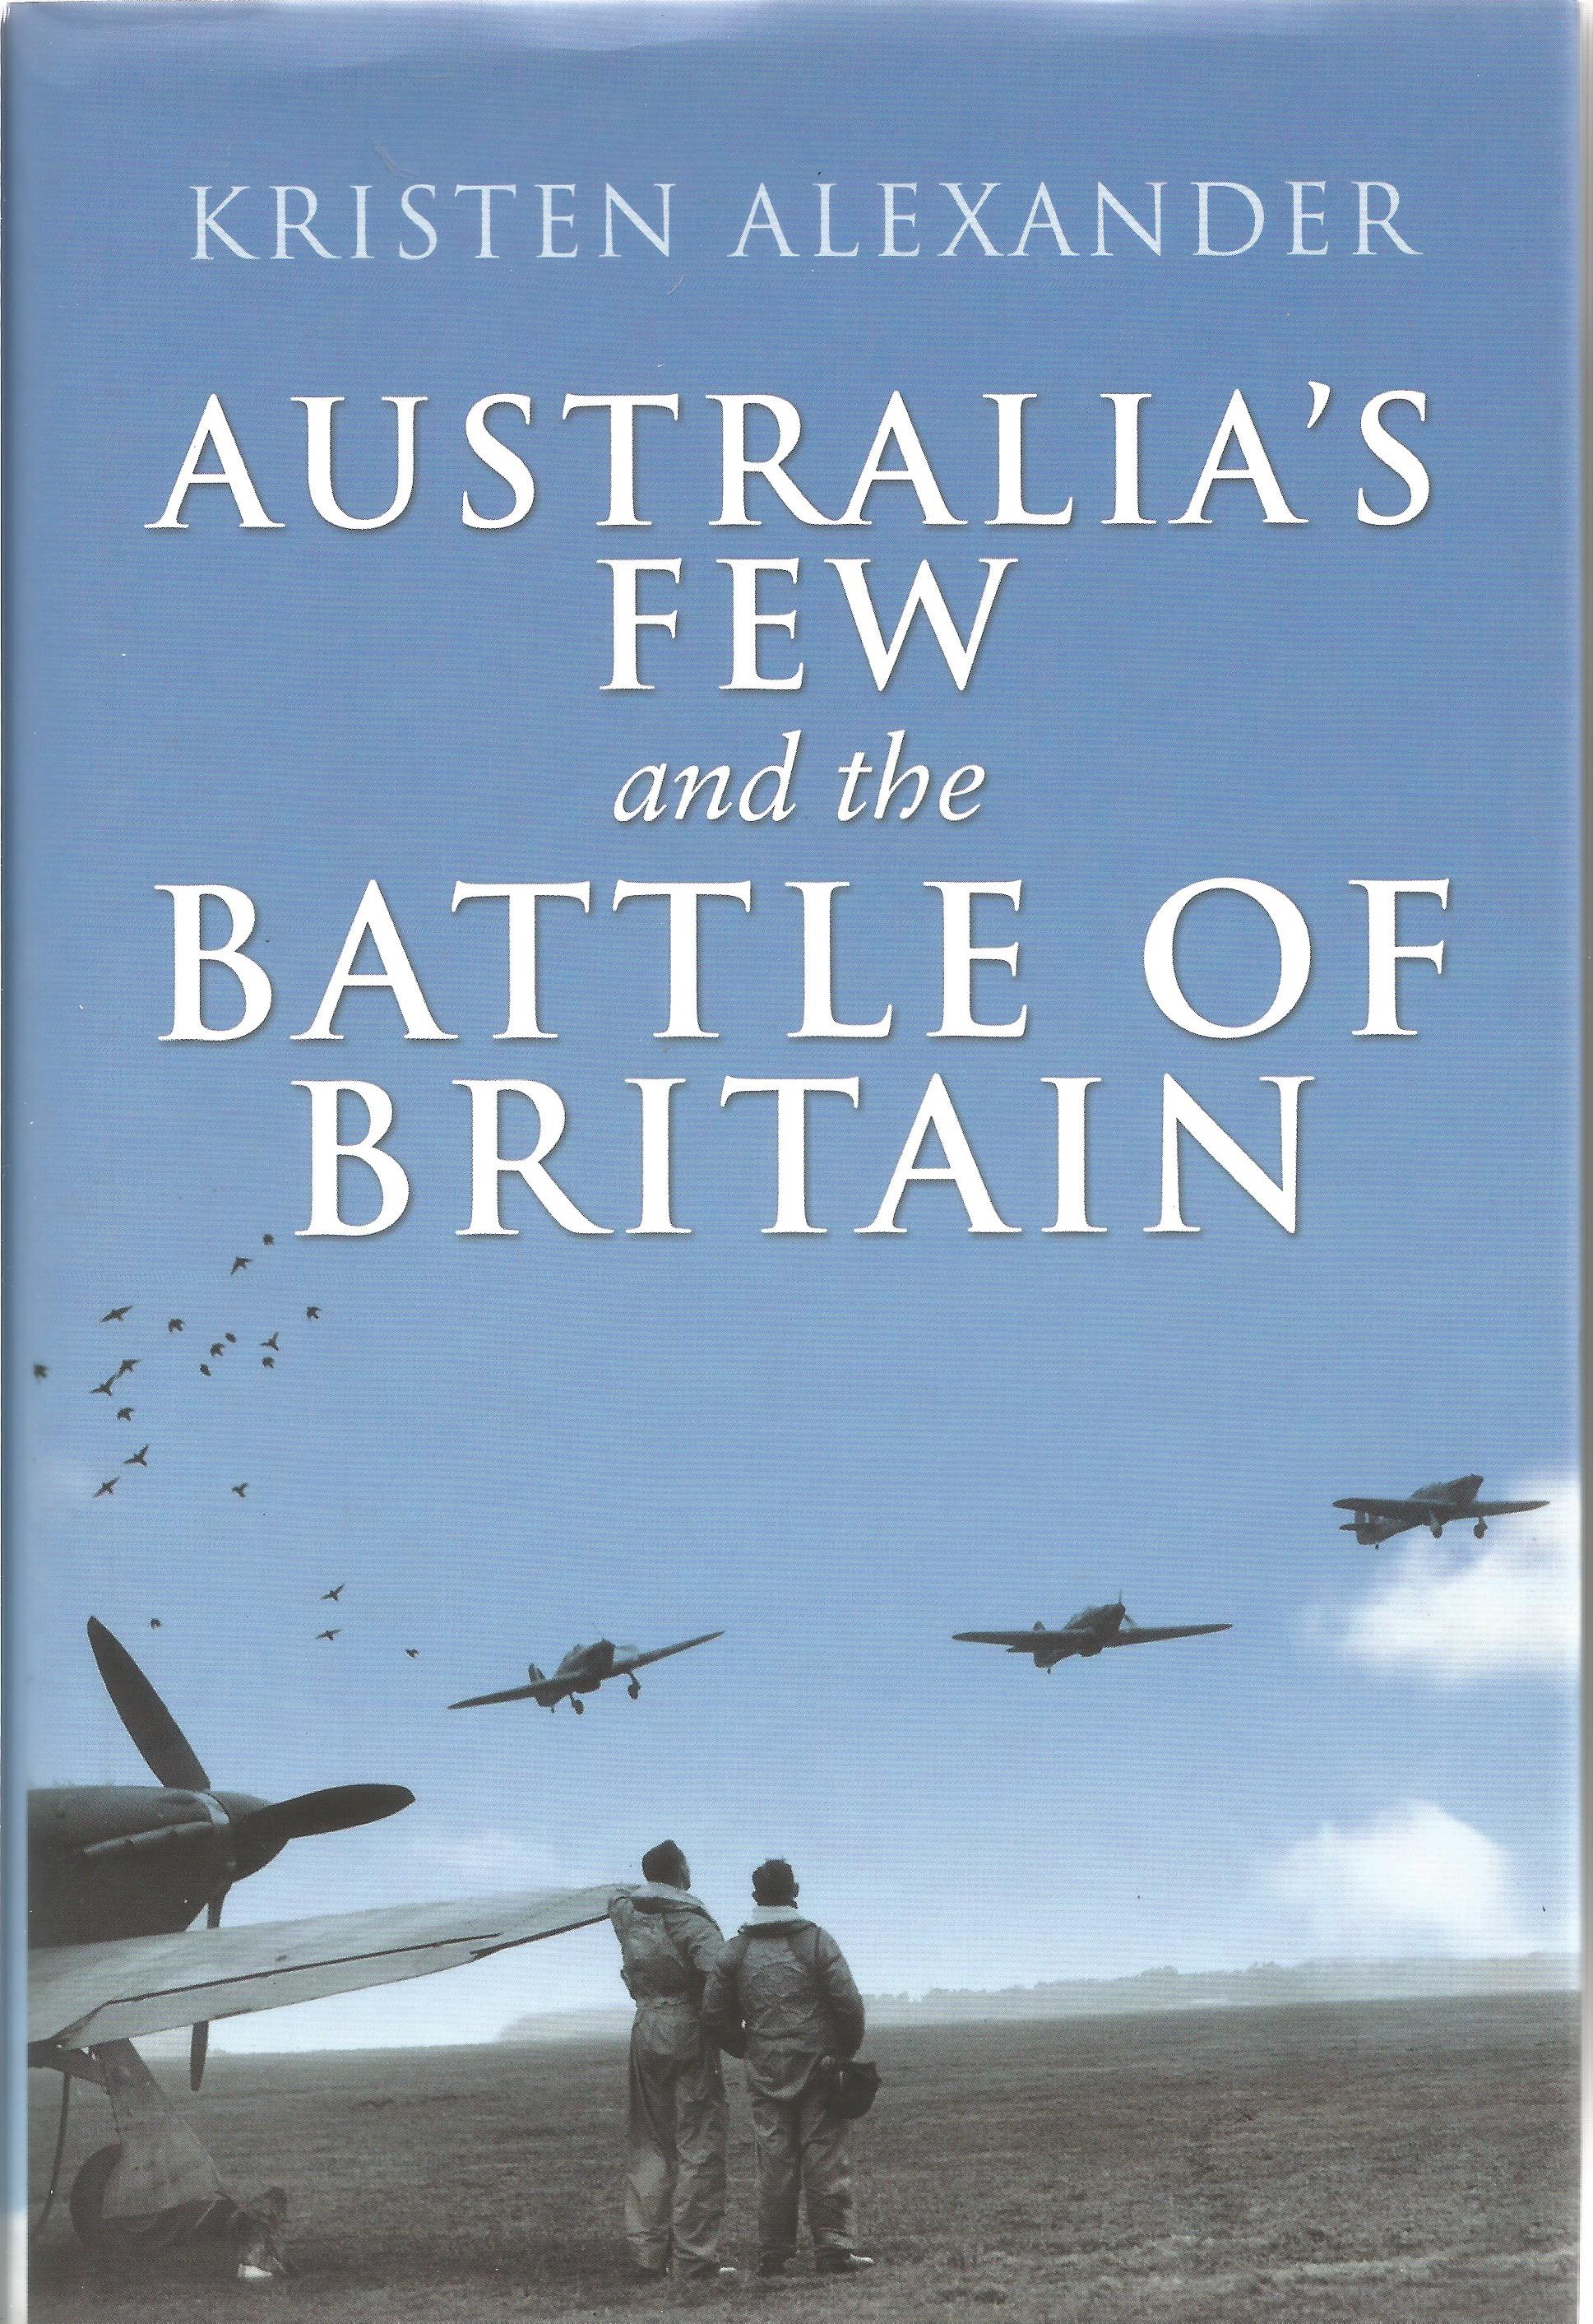 Kristen Alexander. Australia's Few and the Battle Of Britain. A WW2 Second Edition Unsigned hardback